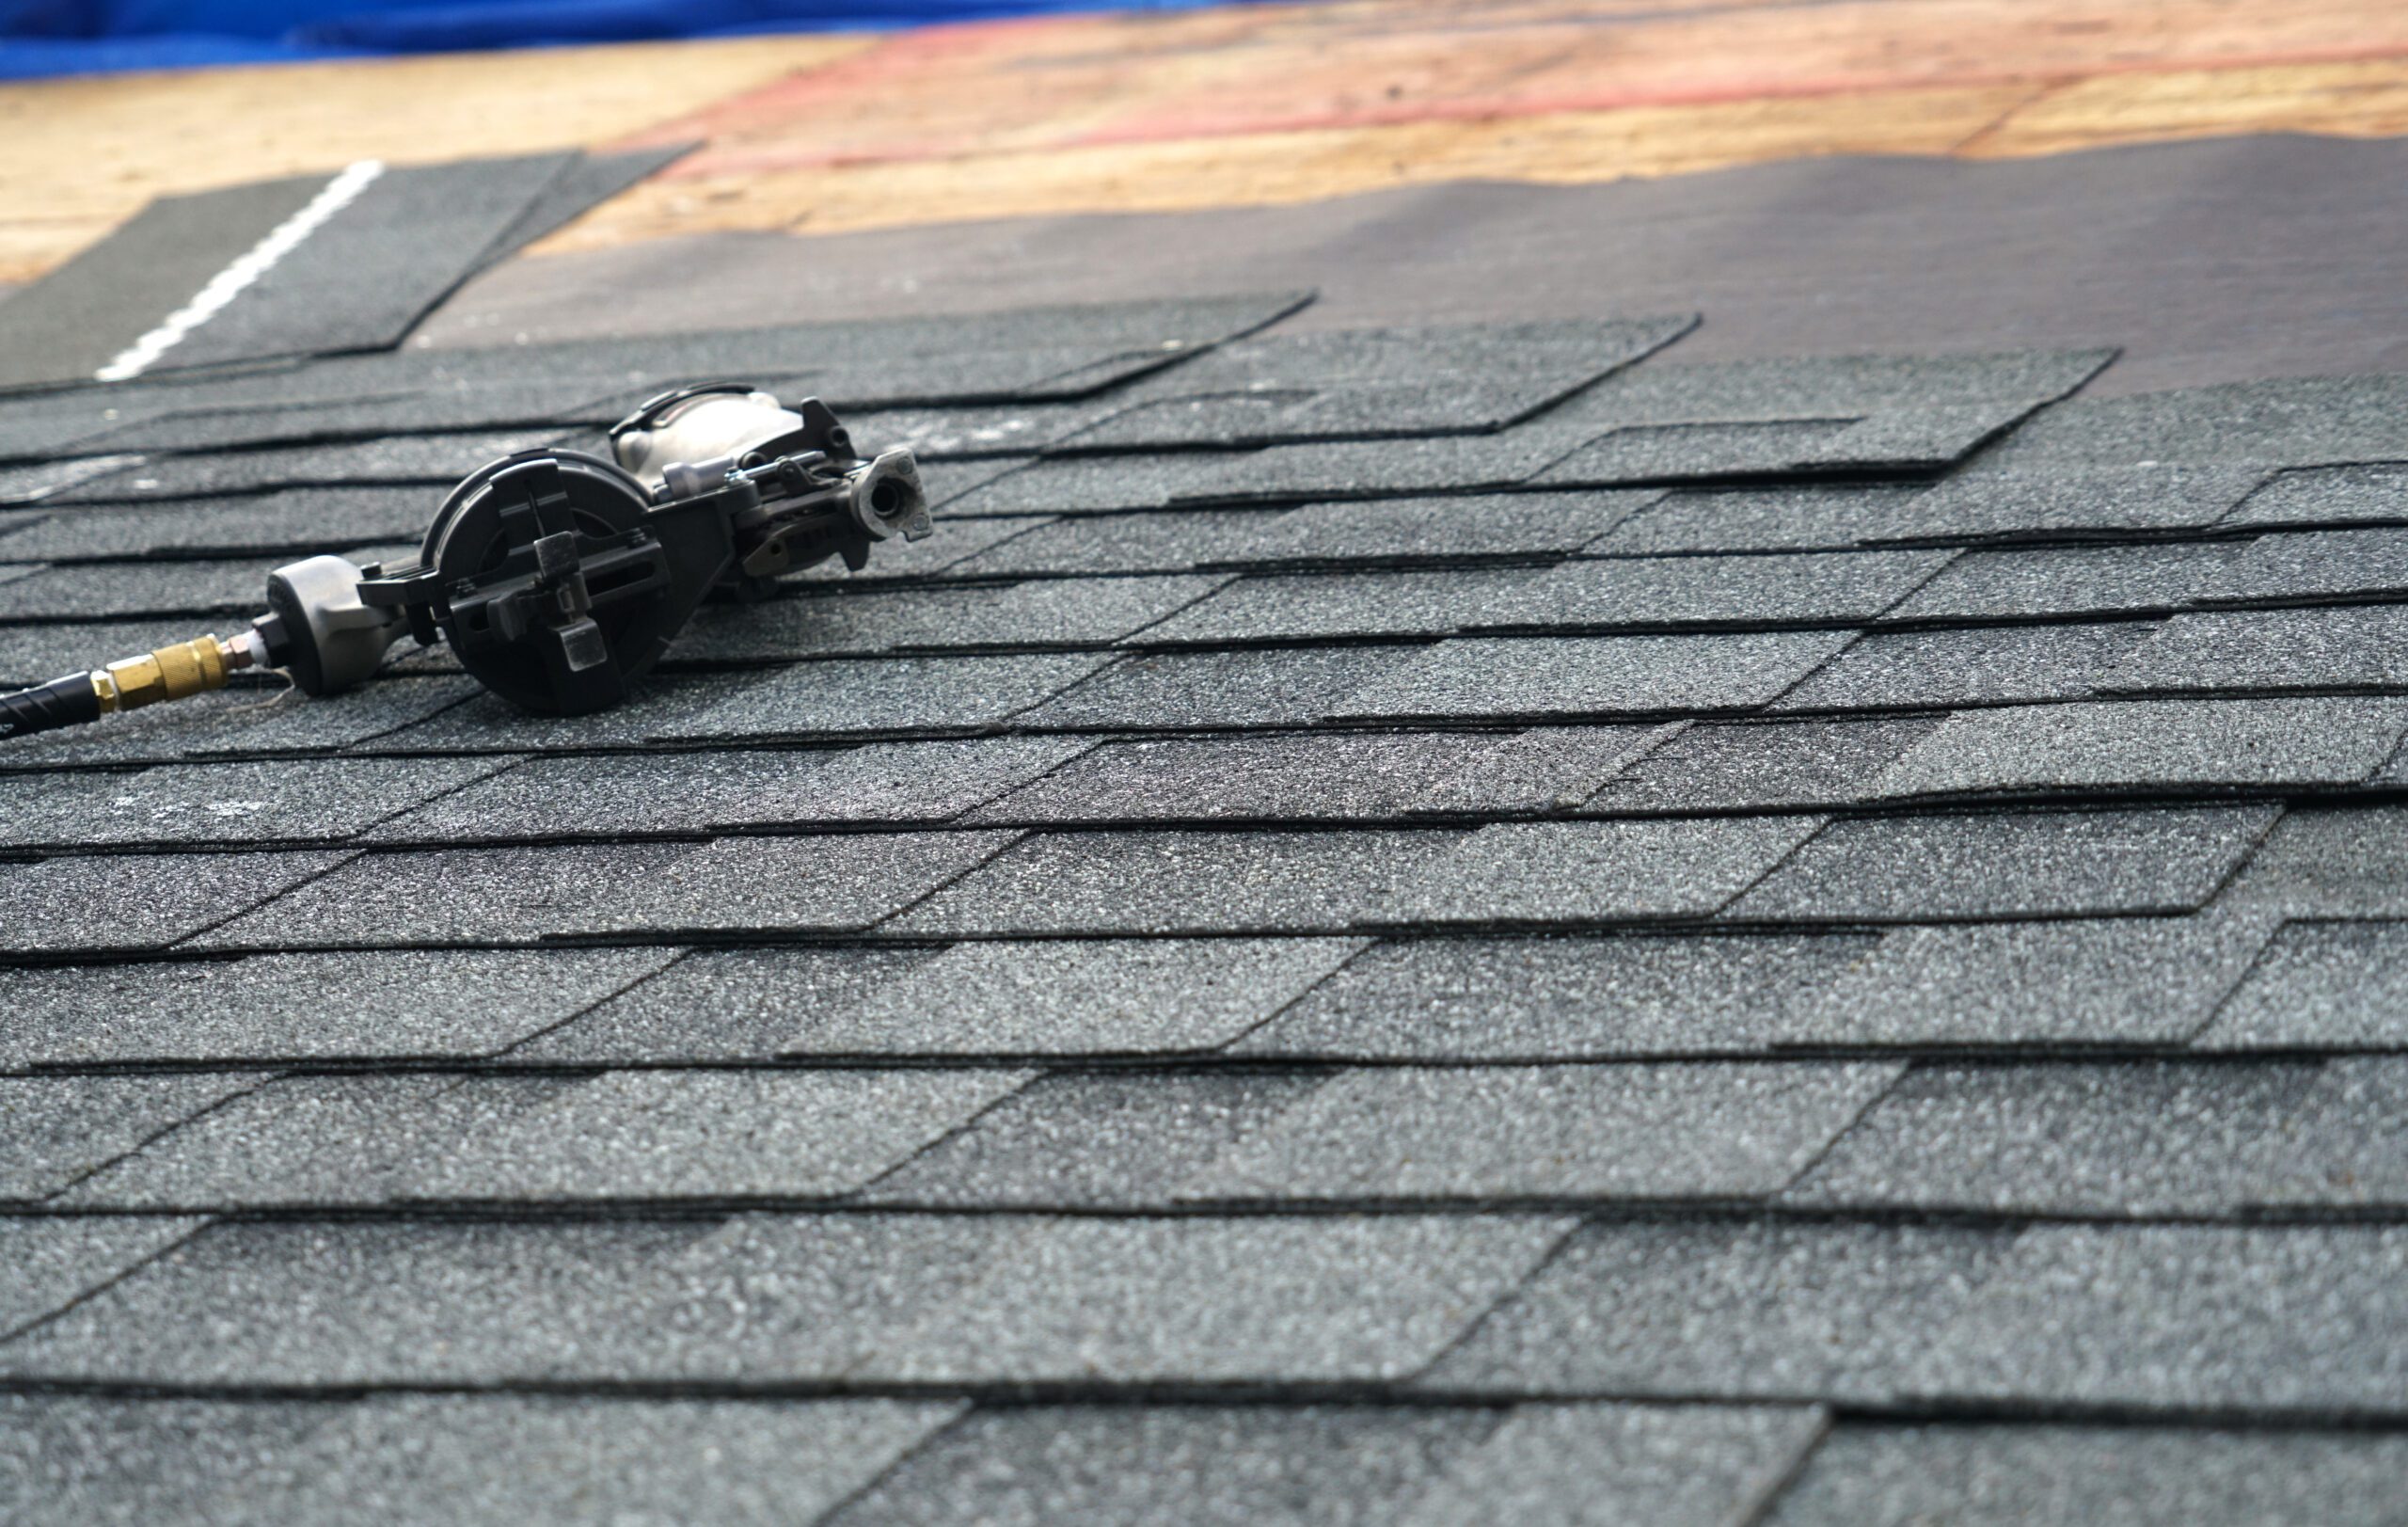 Images of shingles and a nail gun for roofers in Rio Rancho